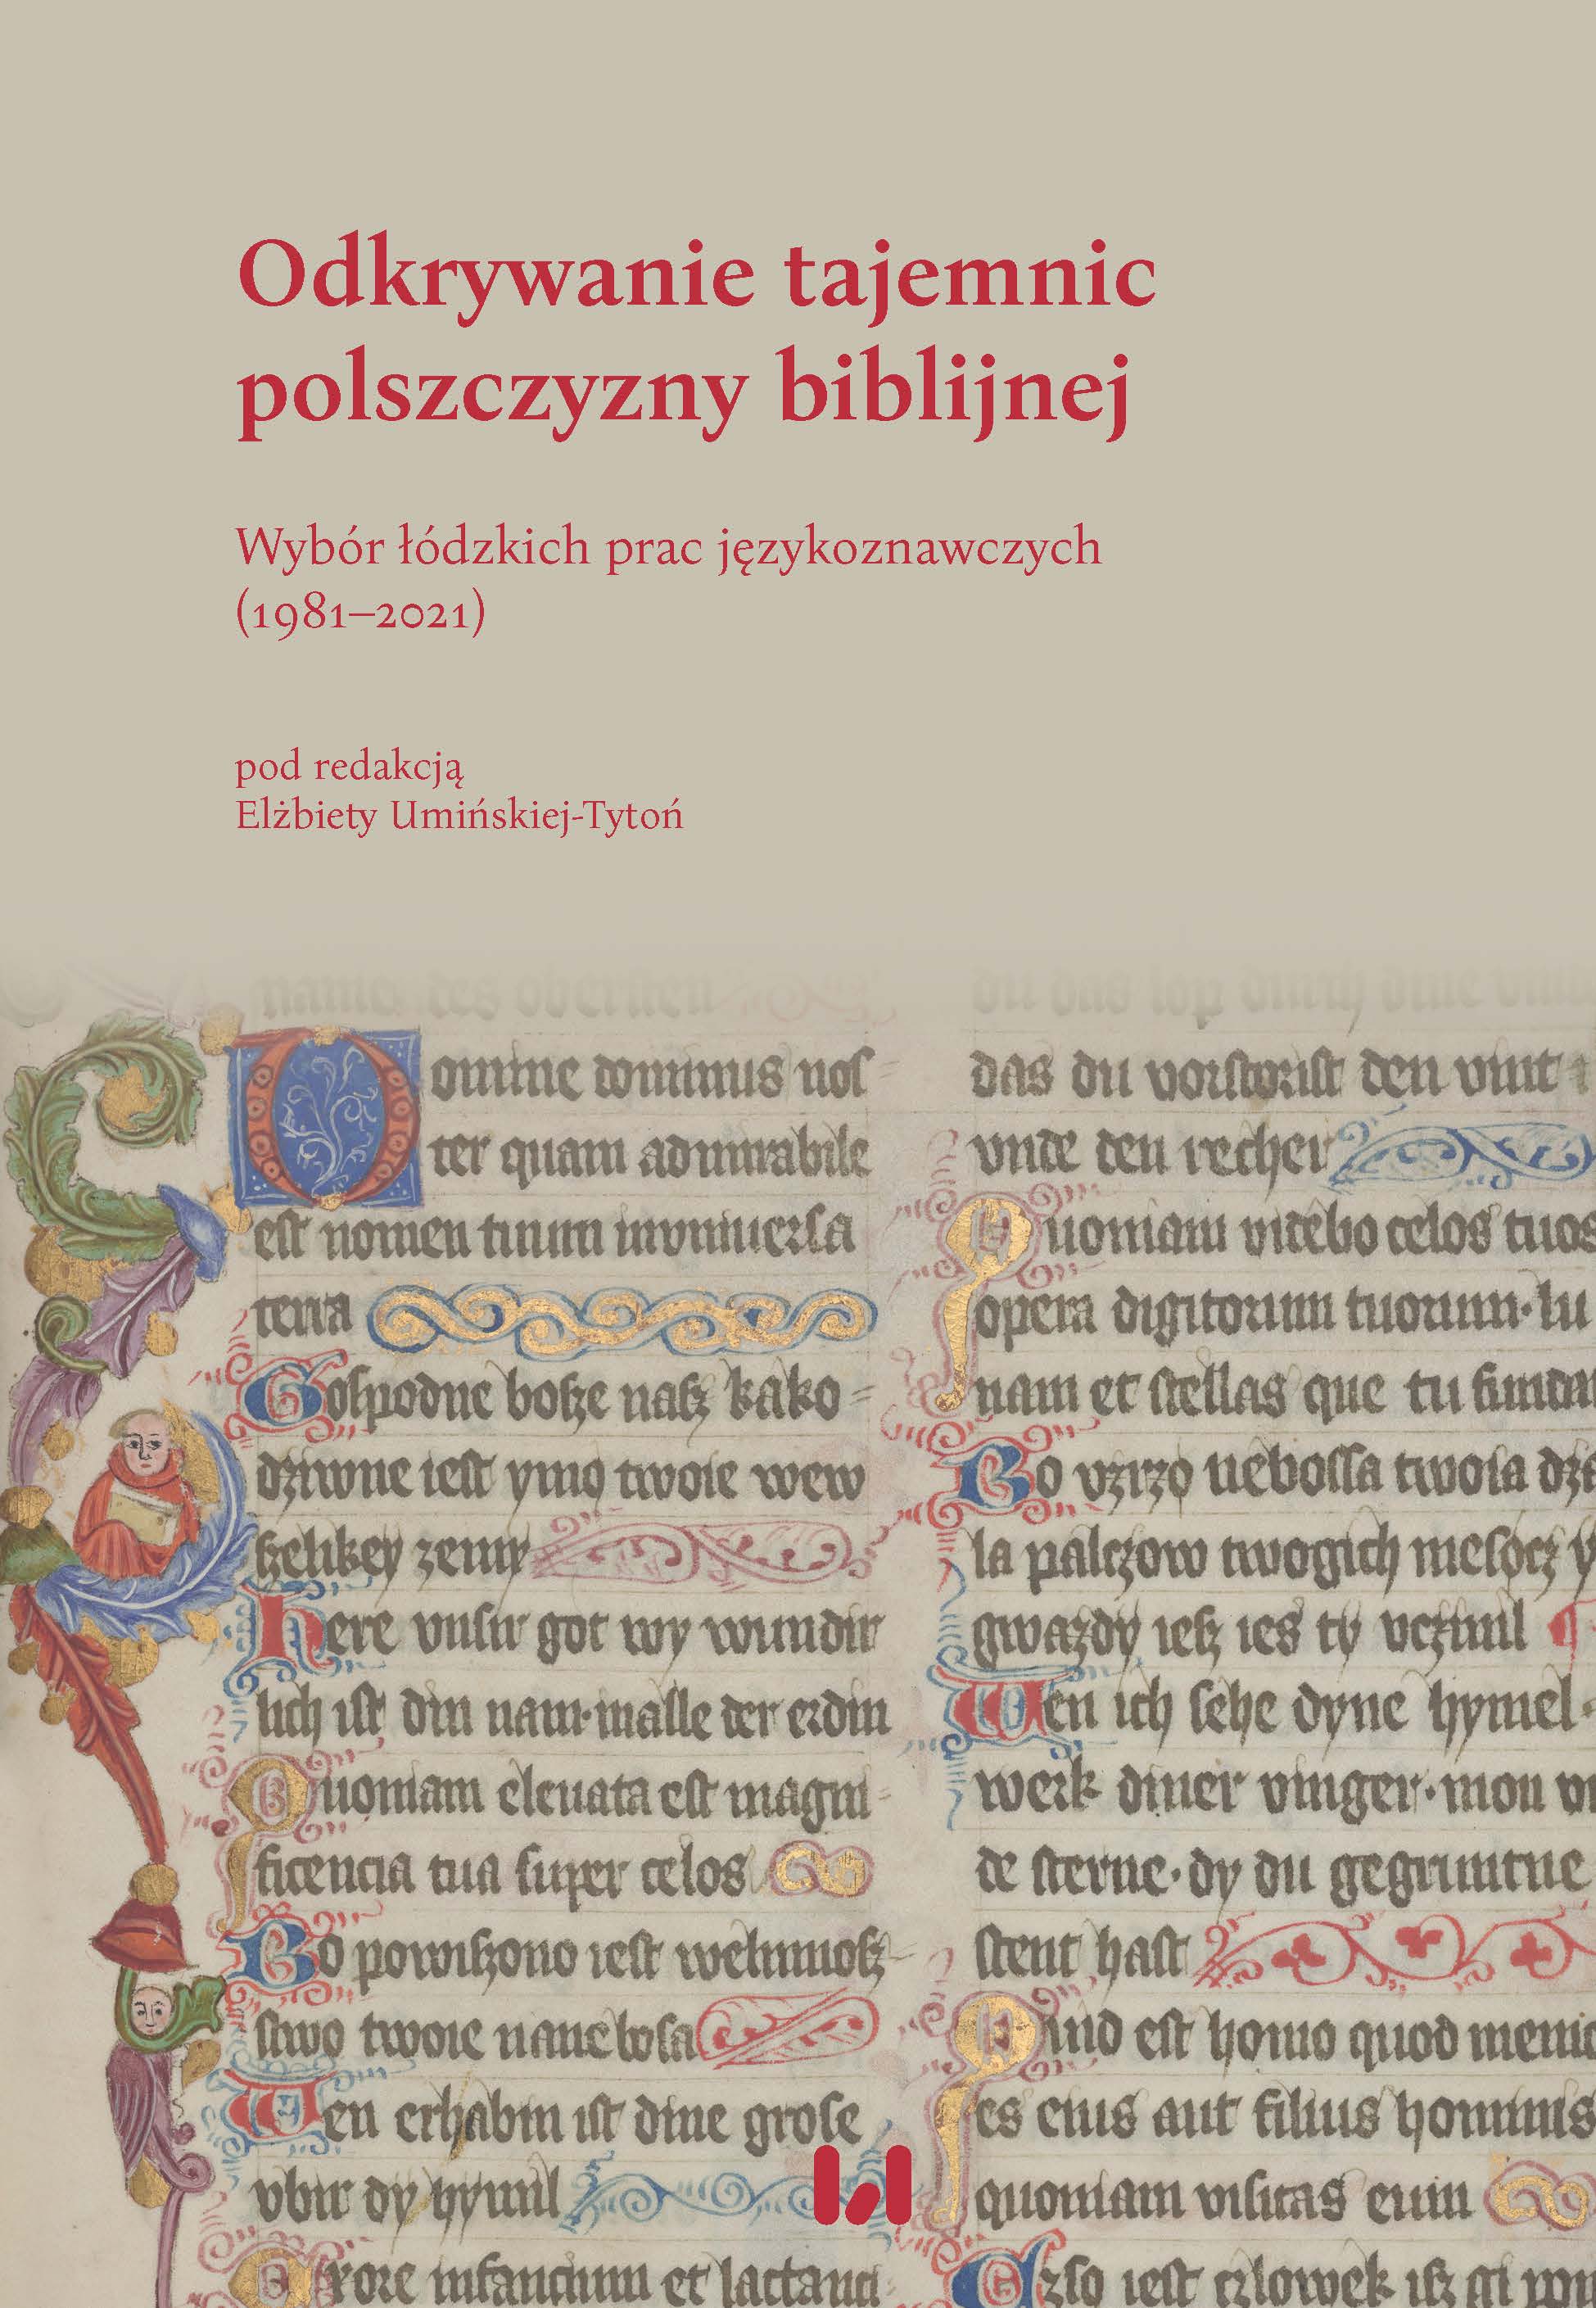 Mikołaj Rej's "Psałterz Dawidów" and the Polish translation tradition. On the example of Psalm 51 "Miserere mei Deus" Cover Image